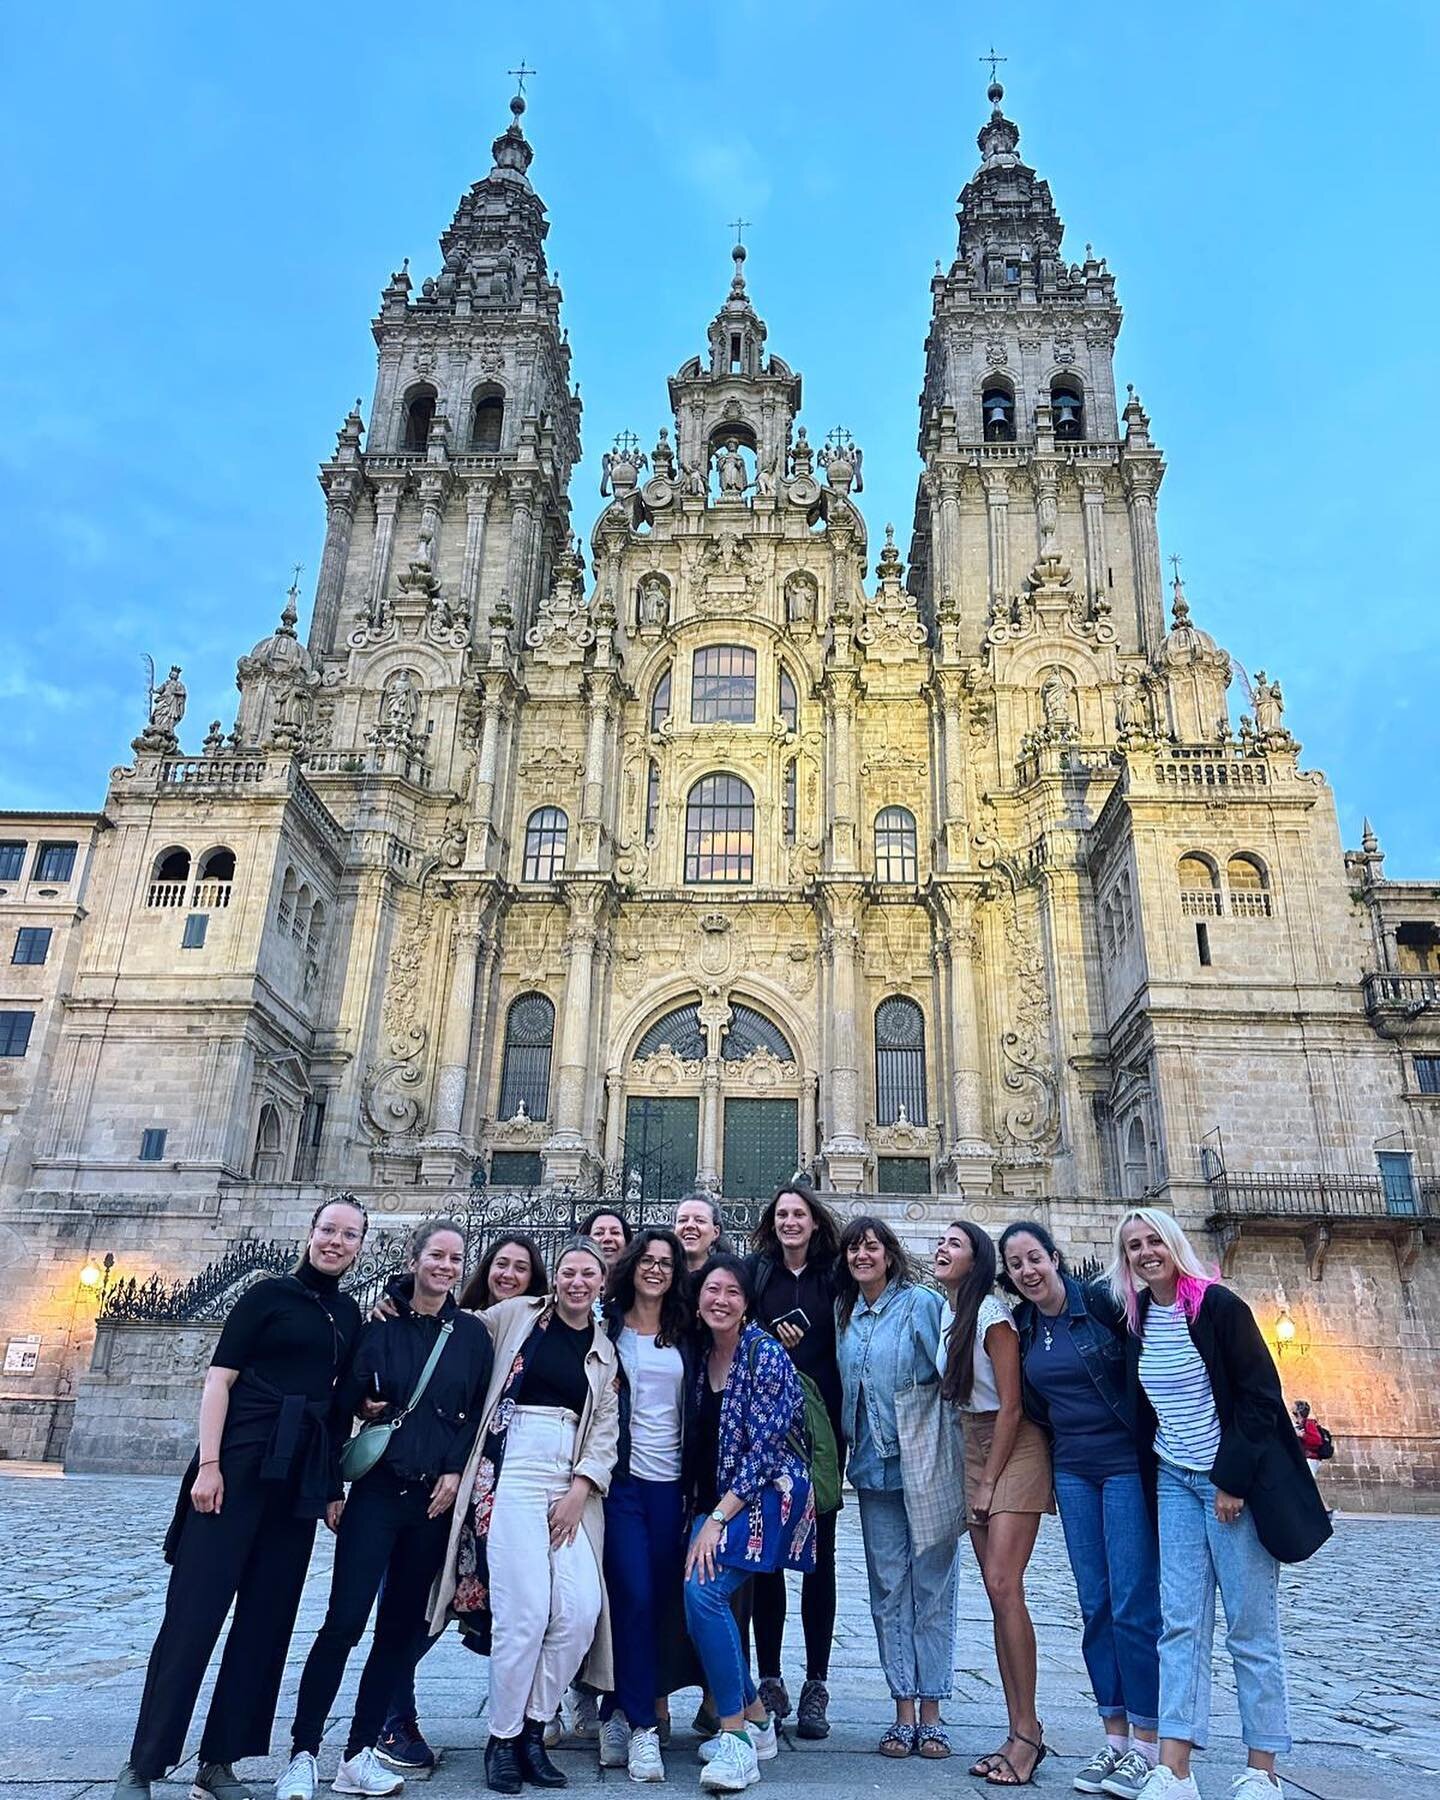 #Inspired by #Spain! I was lucky to have the opportunity to spend the past month exploring the Spanish business ecosystems, practices, and networks during a very insightful and fun month as part of #thebreakfellowship accelerator program (https://the